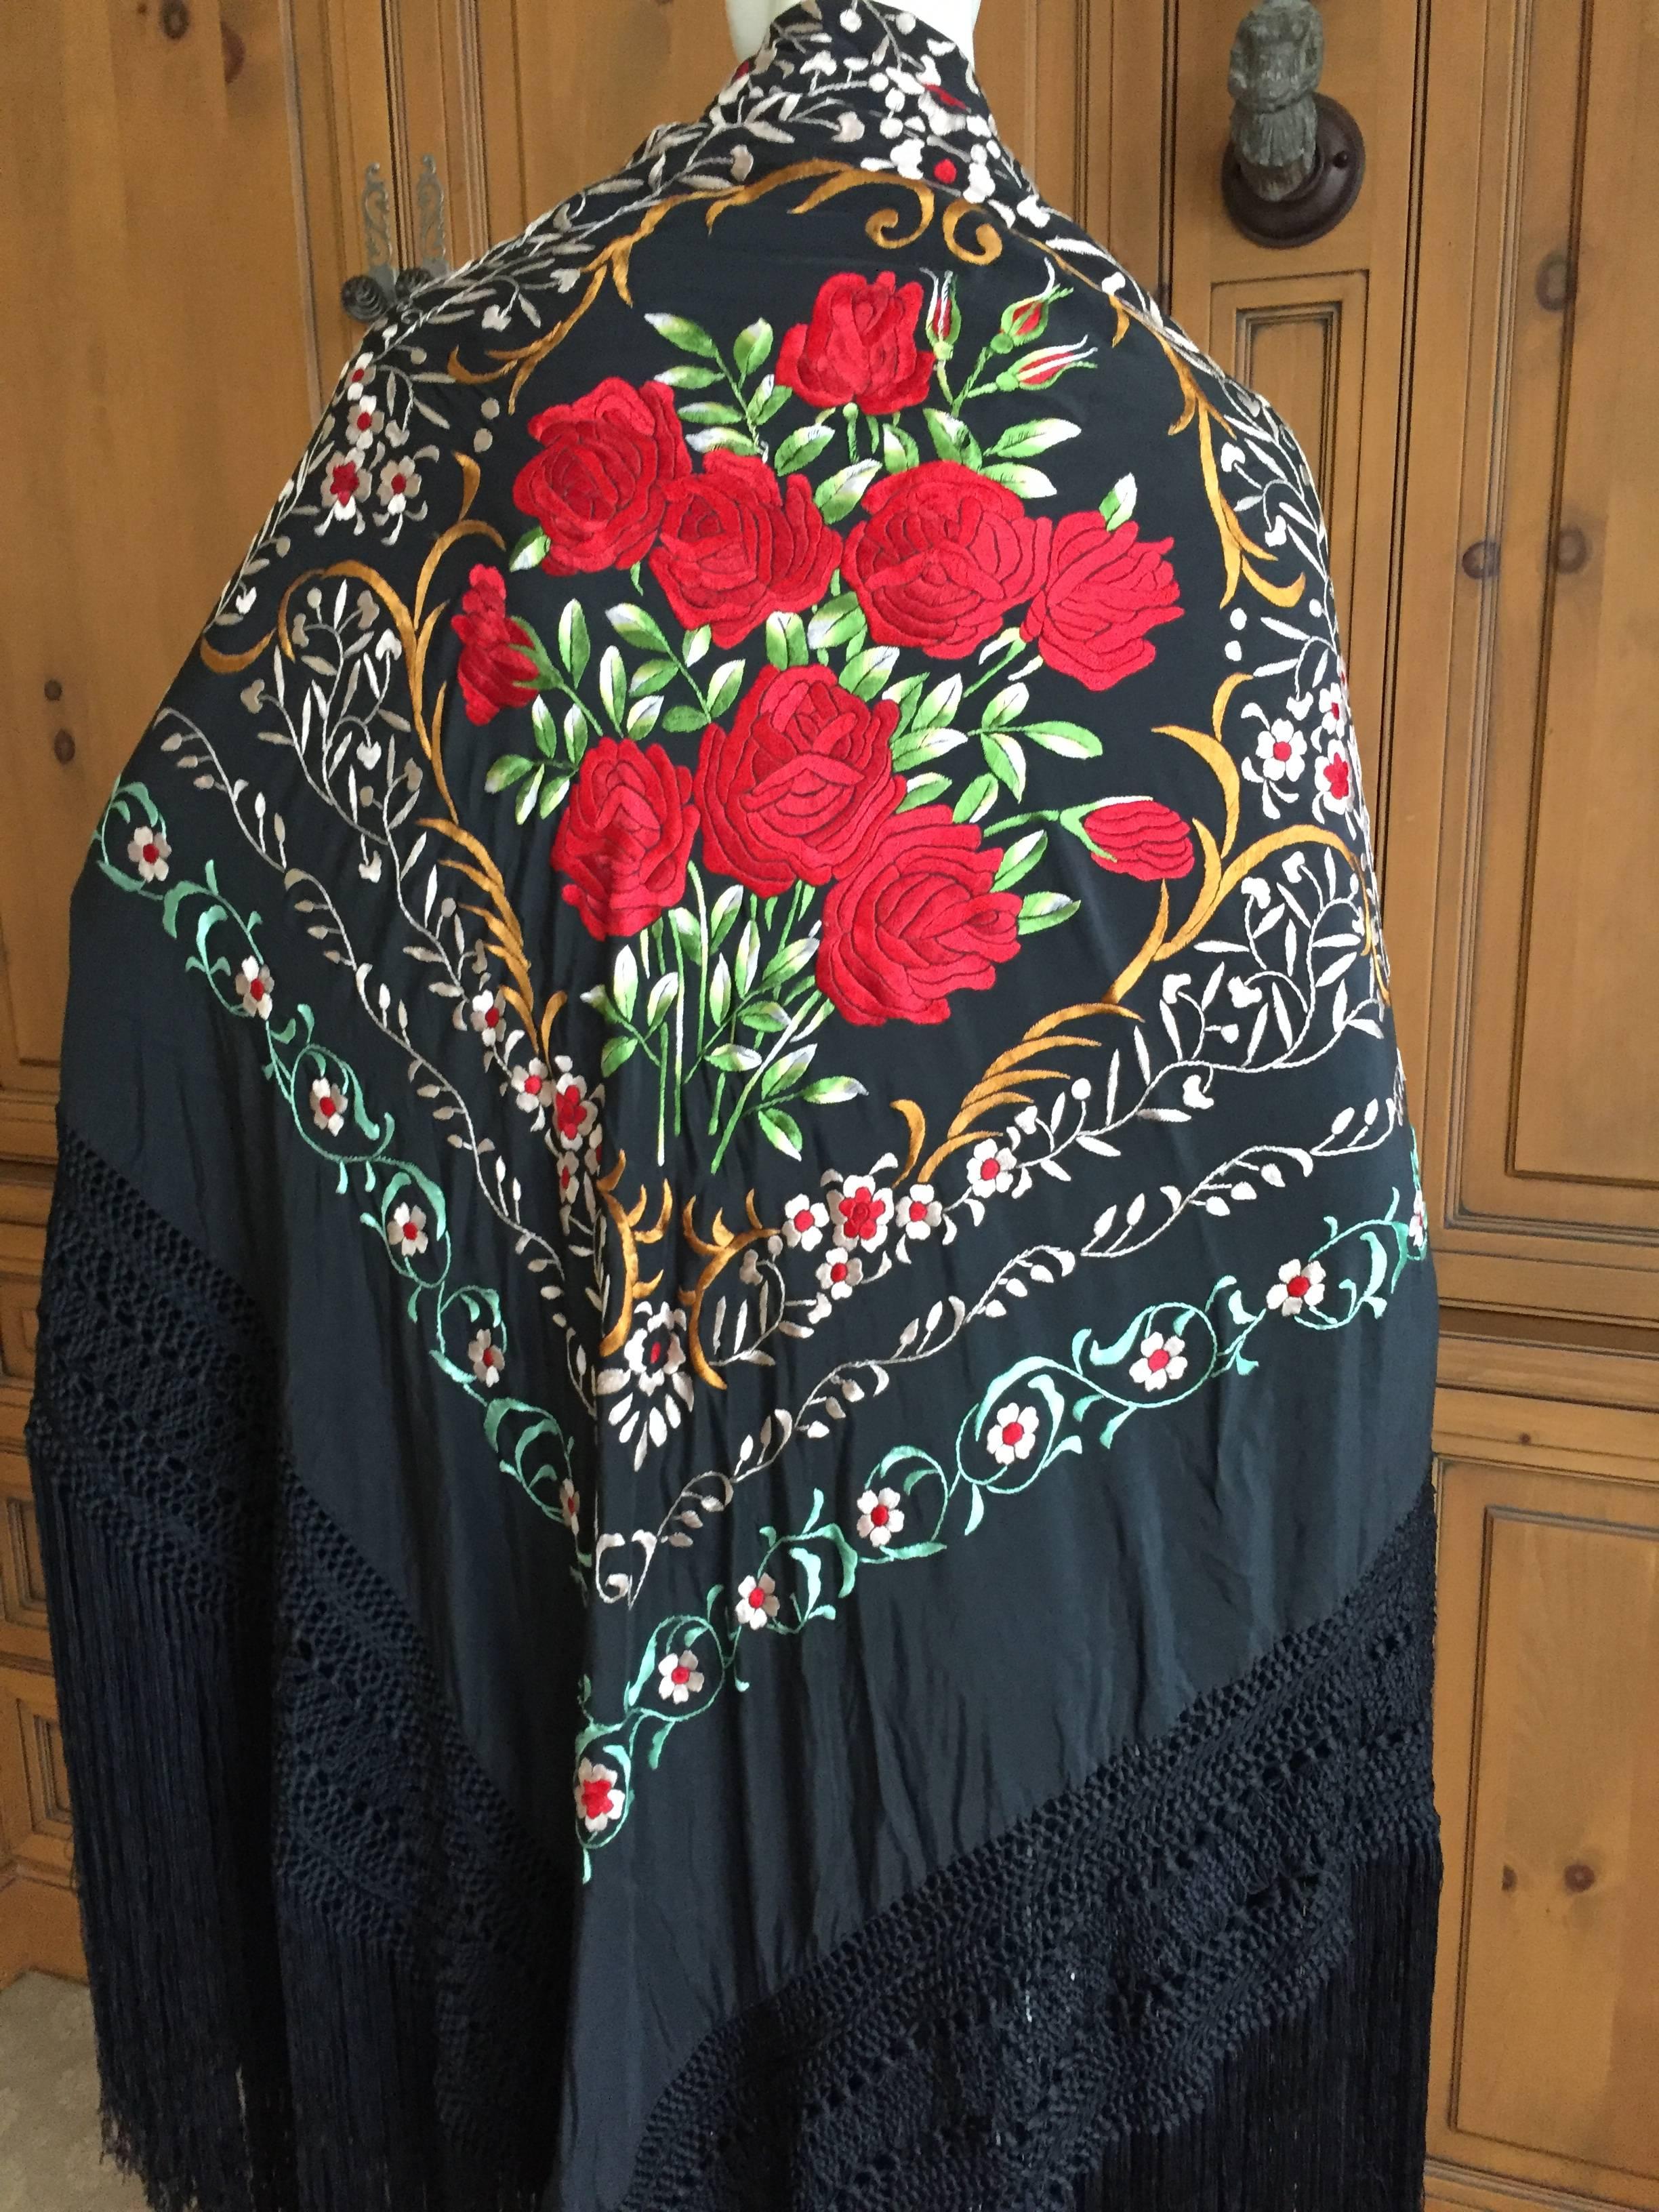 Exquisite Embroidered Roses Antique Canton Fringe Piano Shawl For Sale 1